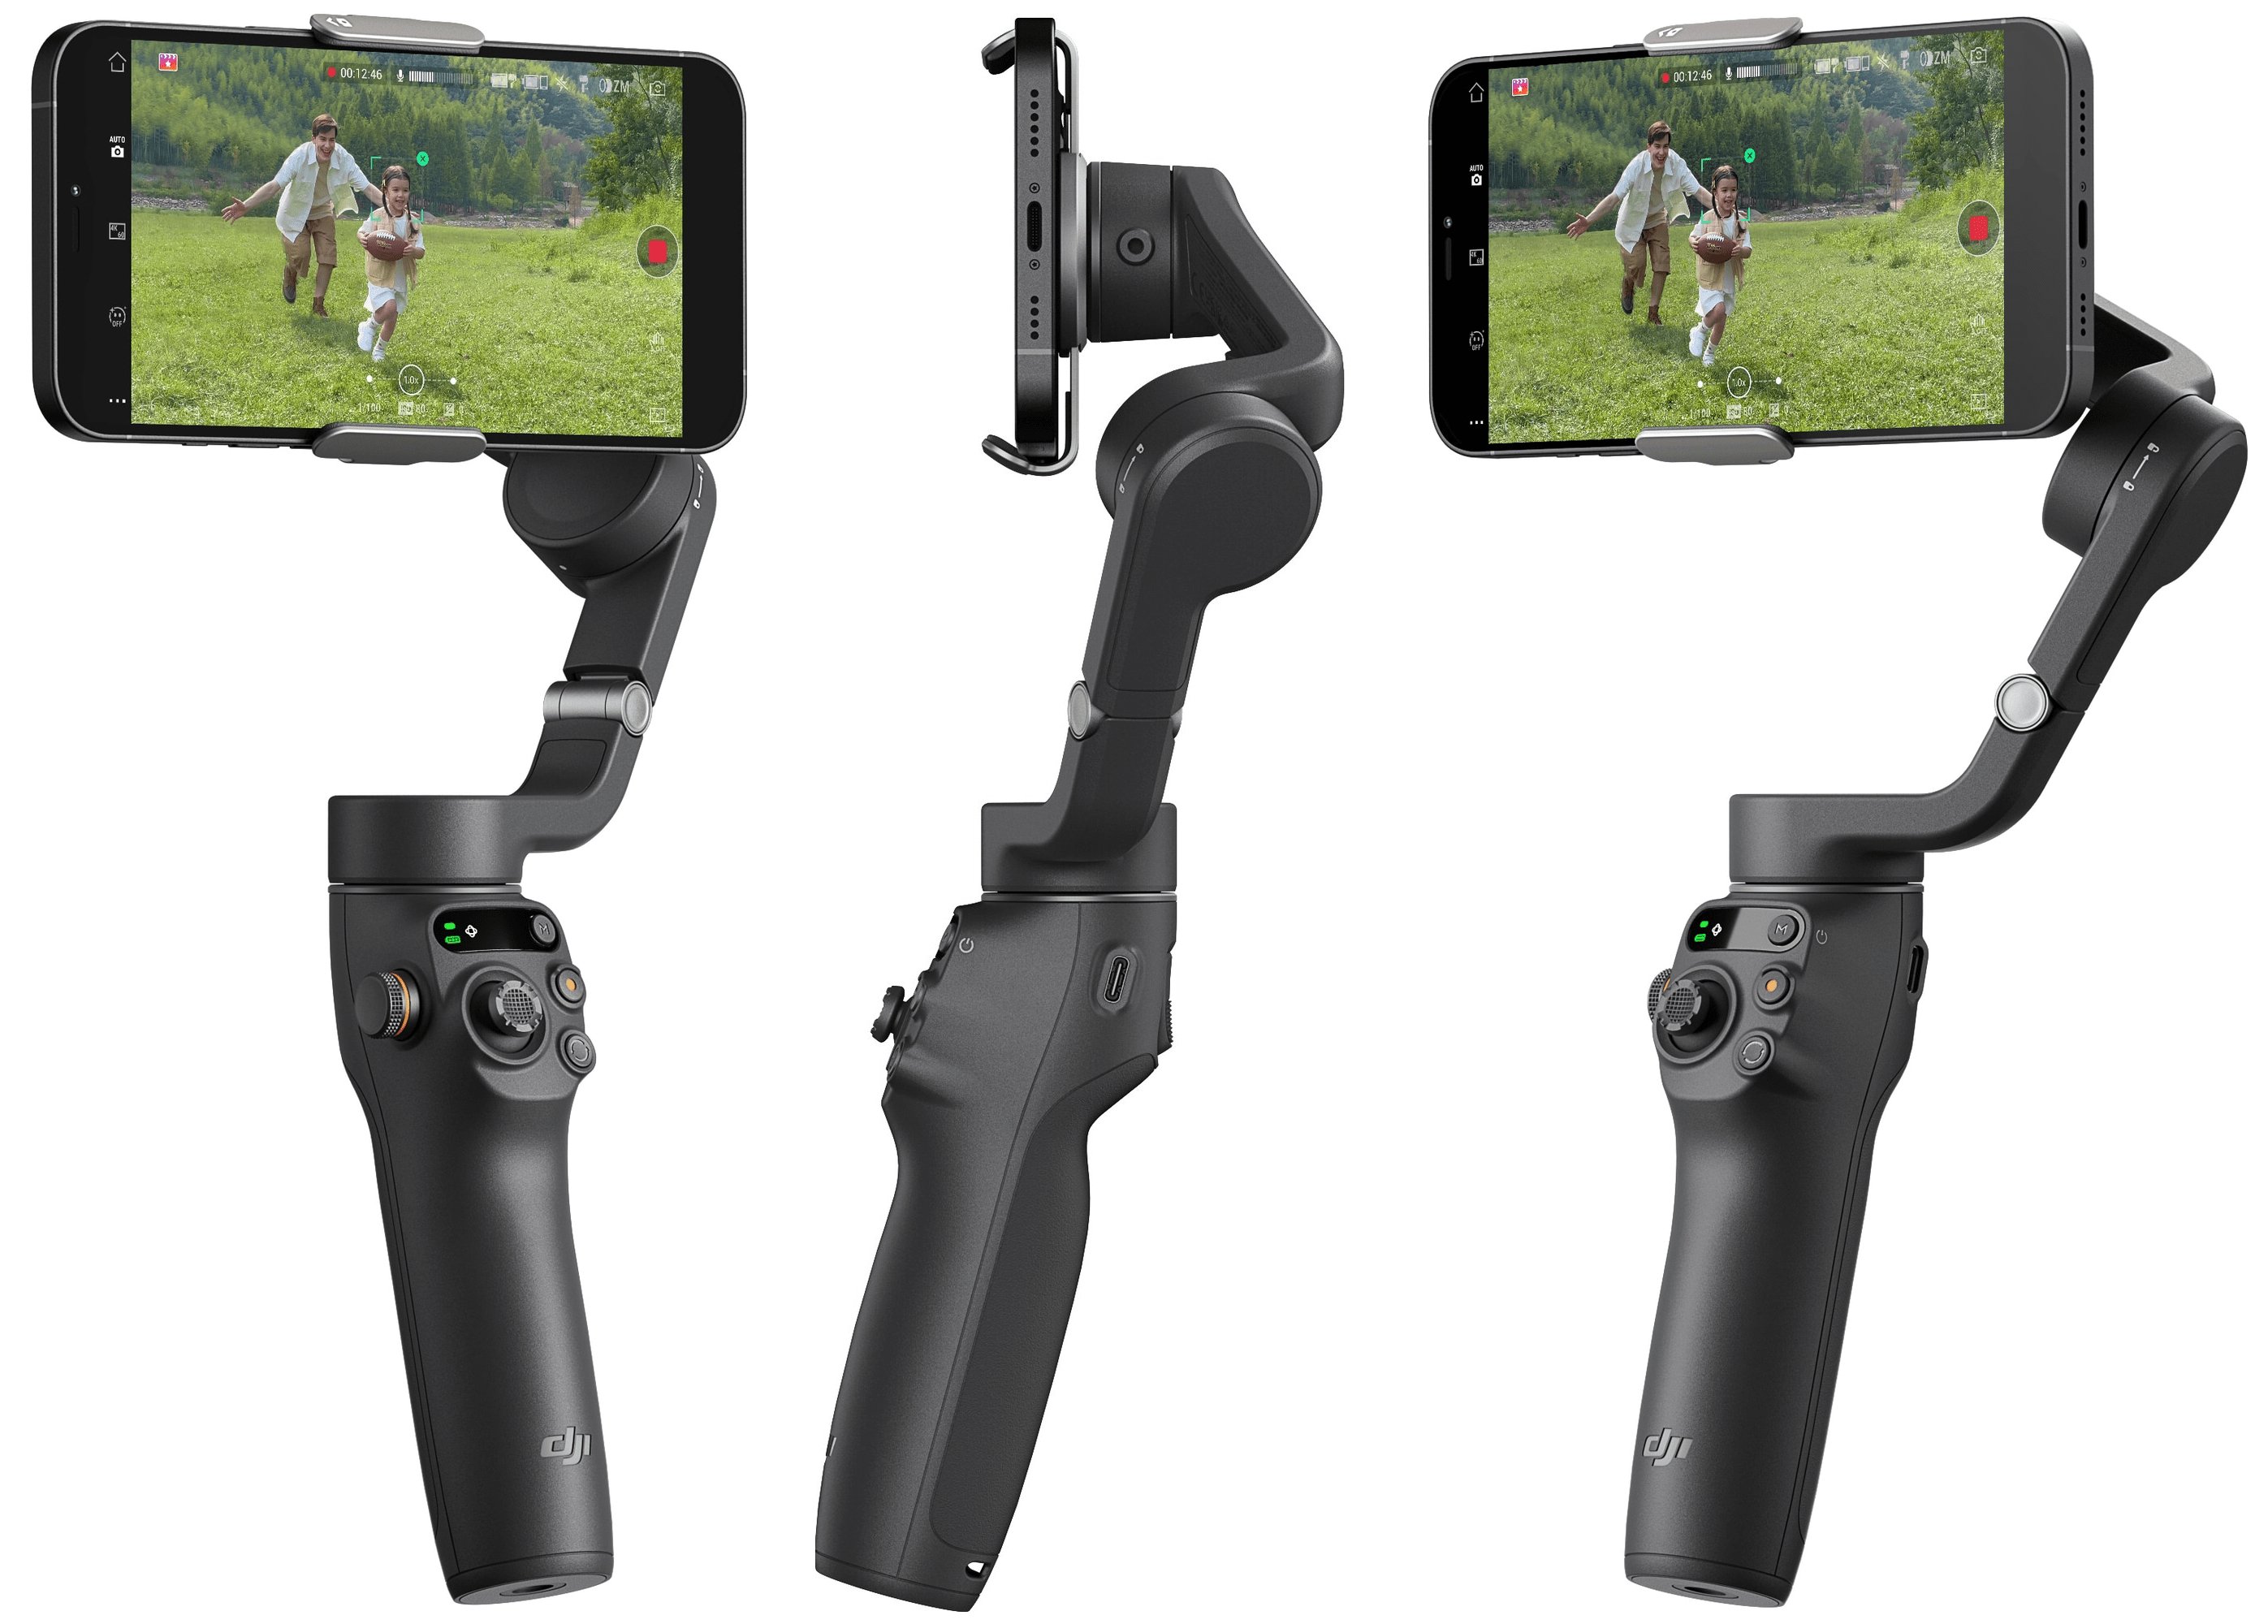 DJI Osmo Mobile 6 vs DJI OM5: What's the Difference?